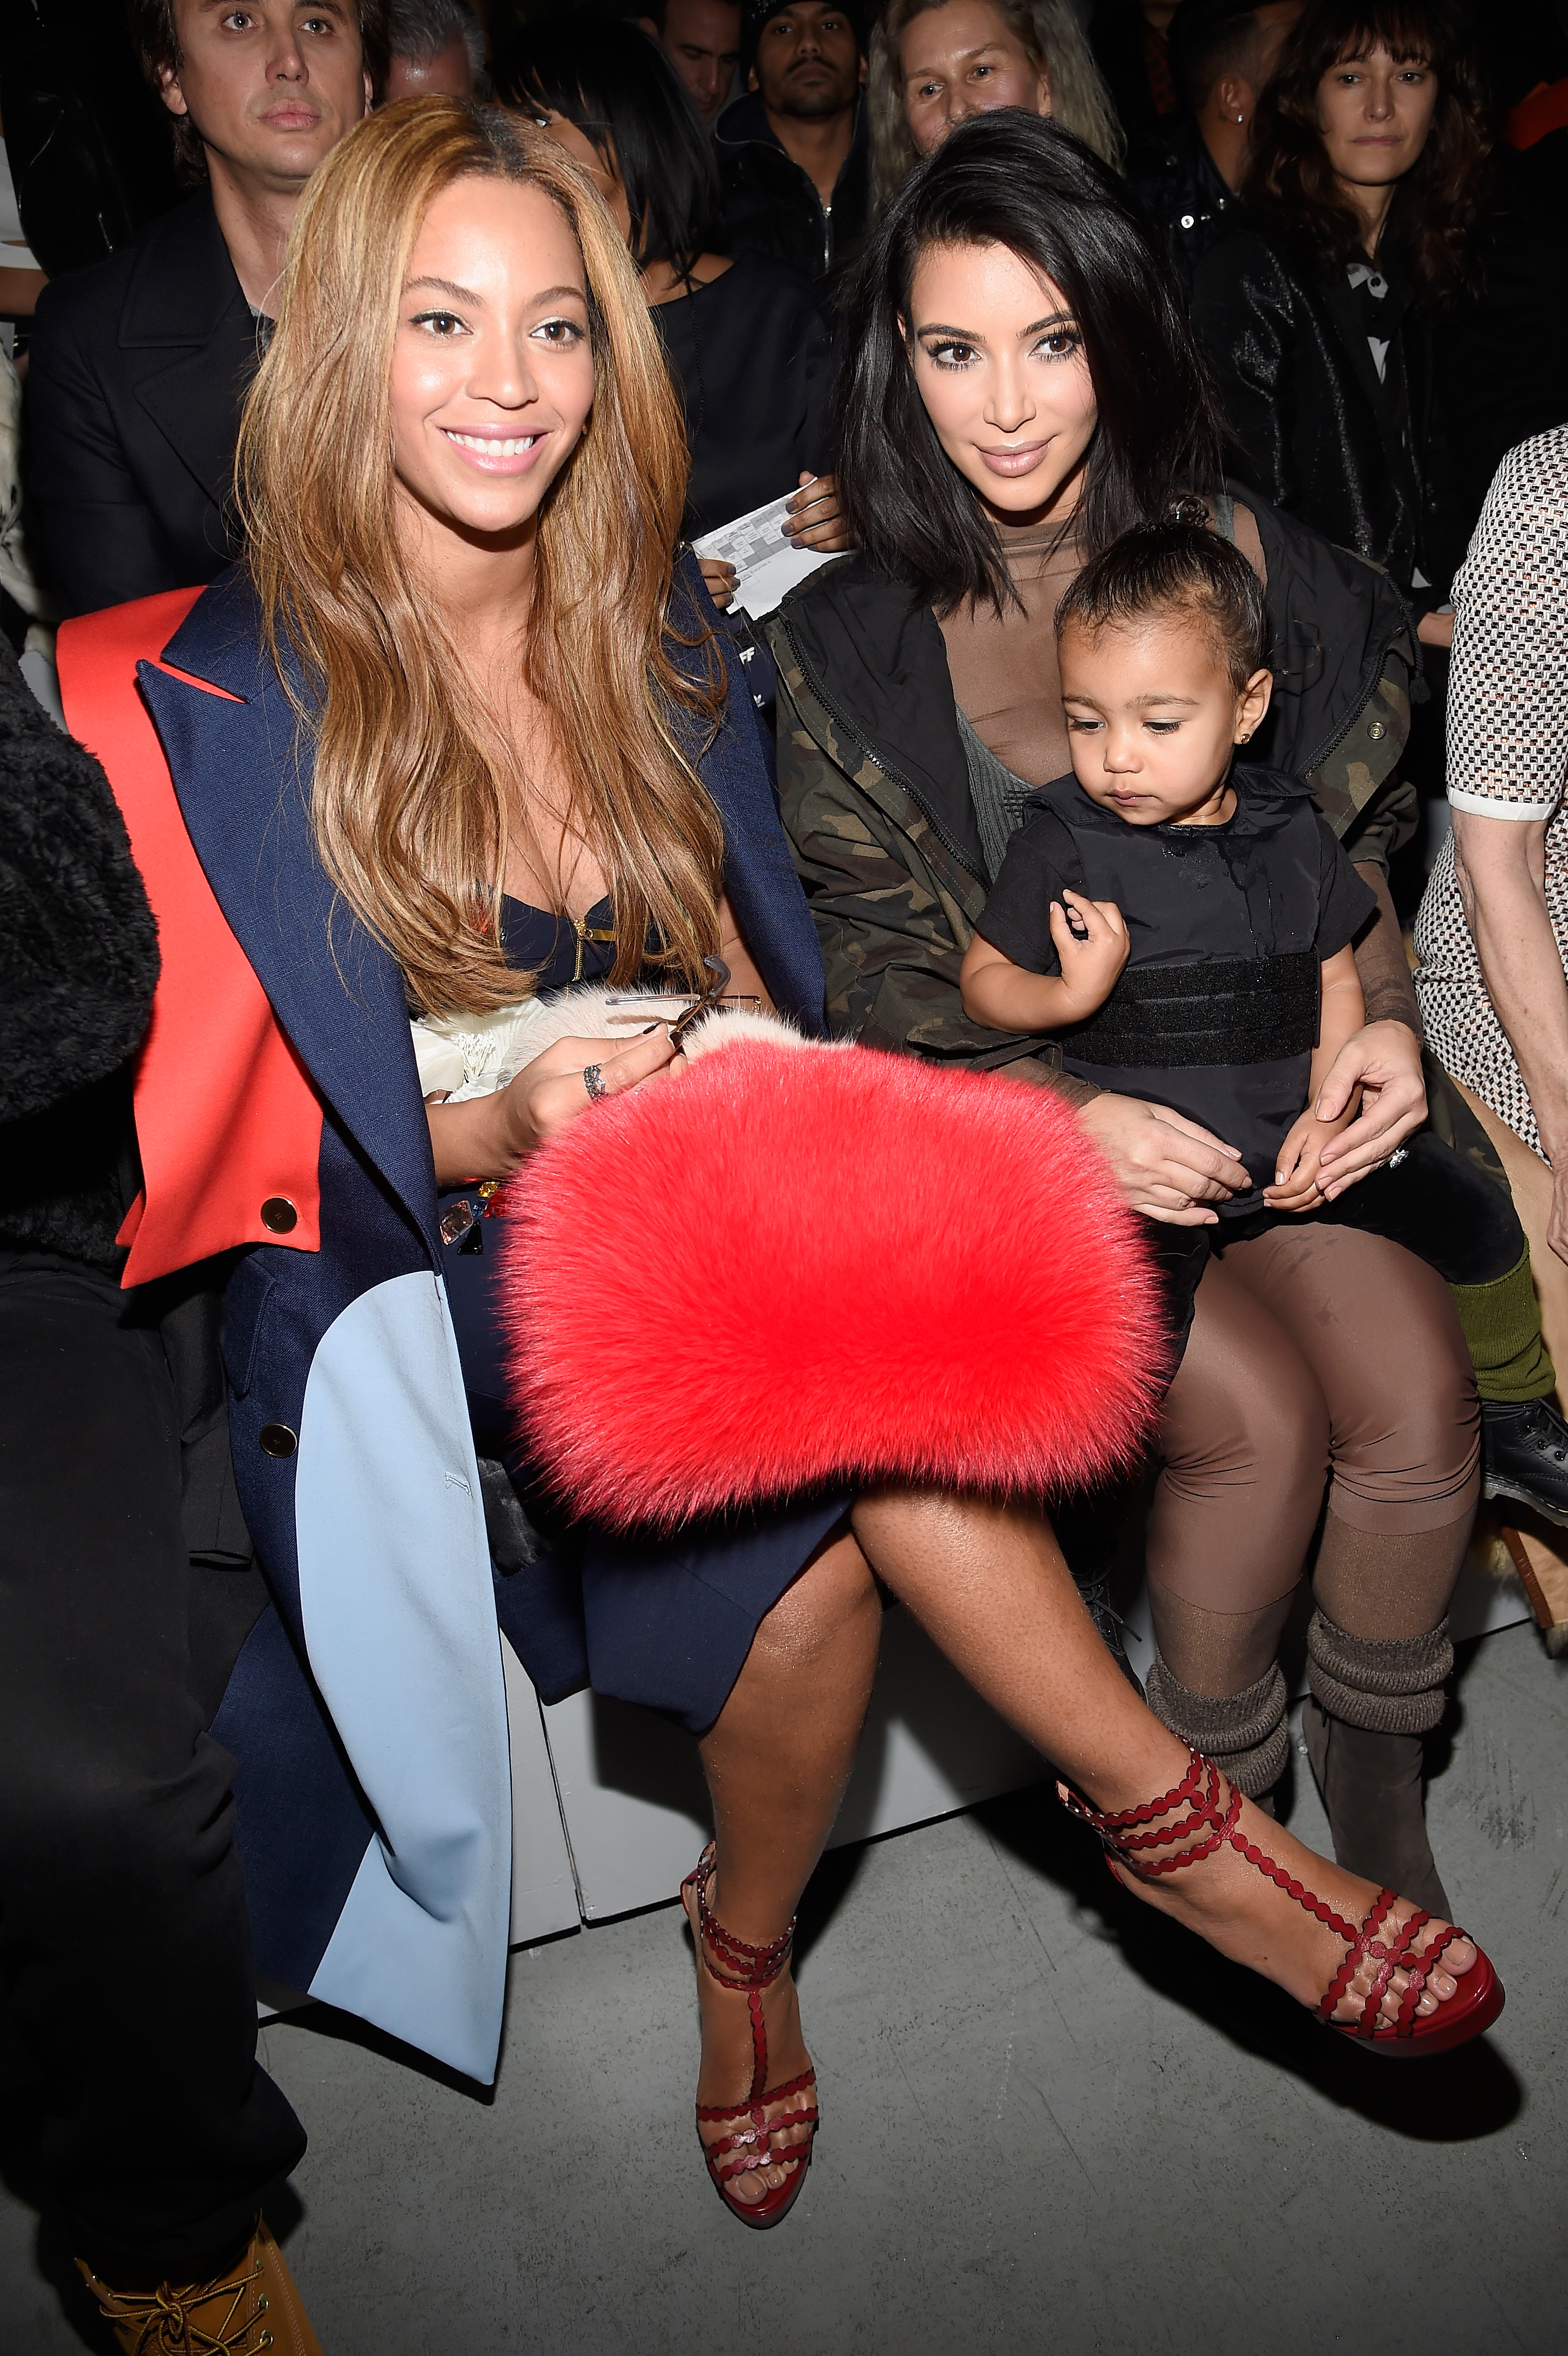 Beyonce, Kim Kardashian, and daughter North attend the adidas Originals x Kanye West YEEZY SEASON 1 fashion show during New York Fashion Week Fall 2015 at Skylight Clarkson Sq on February 12, 2015 in New York City. (Kevin Mazur&mdash;Getty Images)